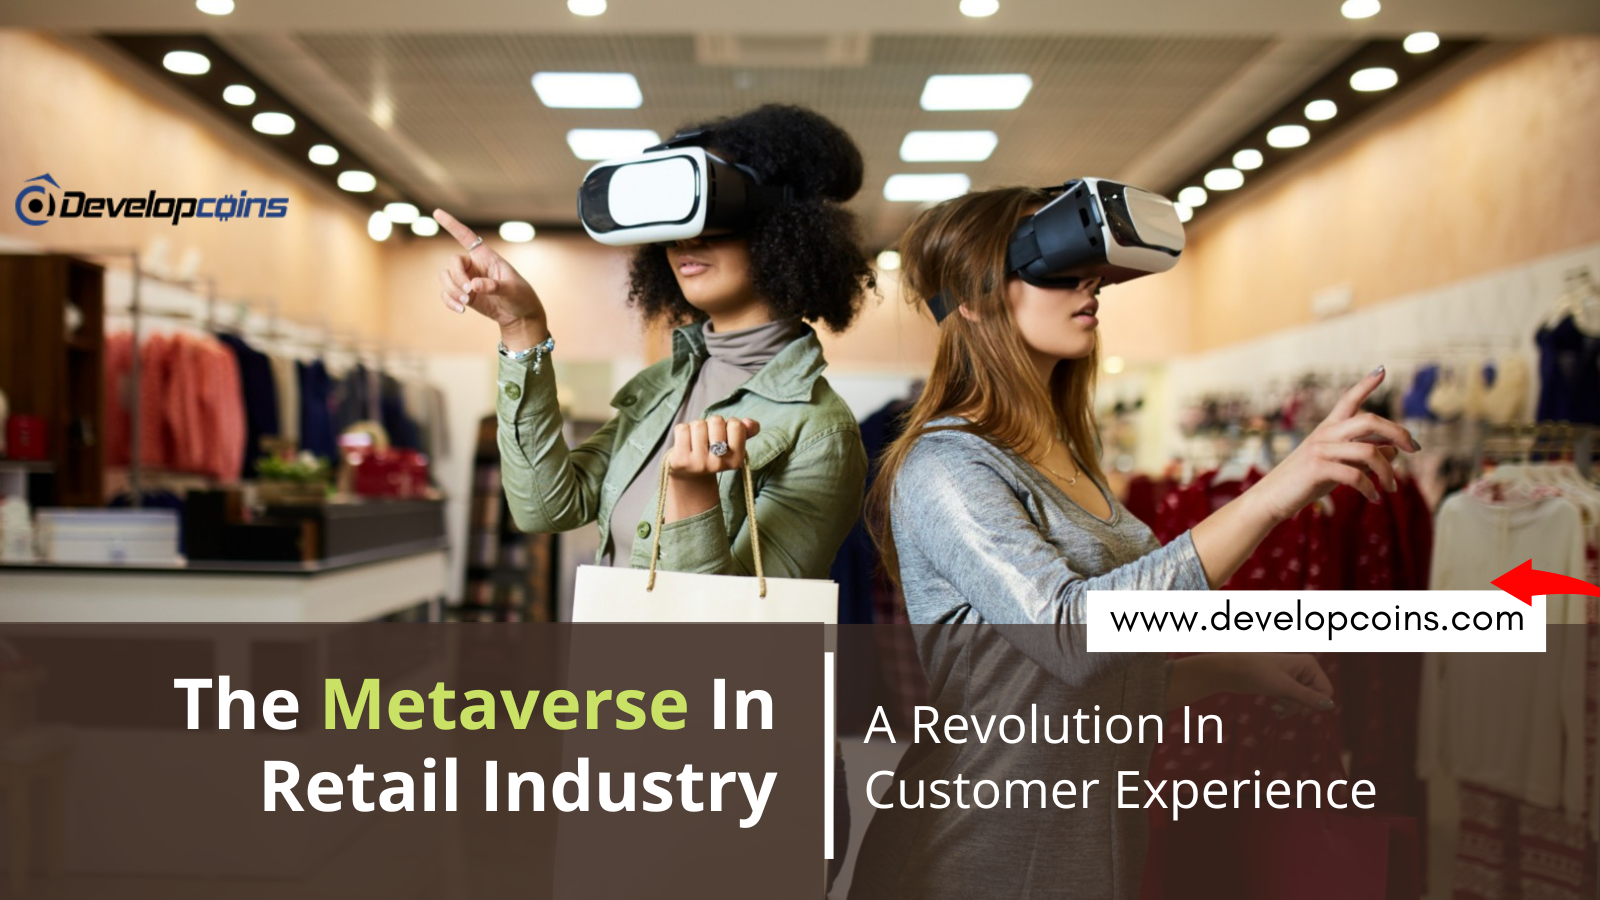 The Metaverse In Retail Industry - A Revolution In Customer Experience